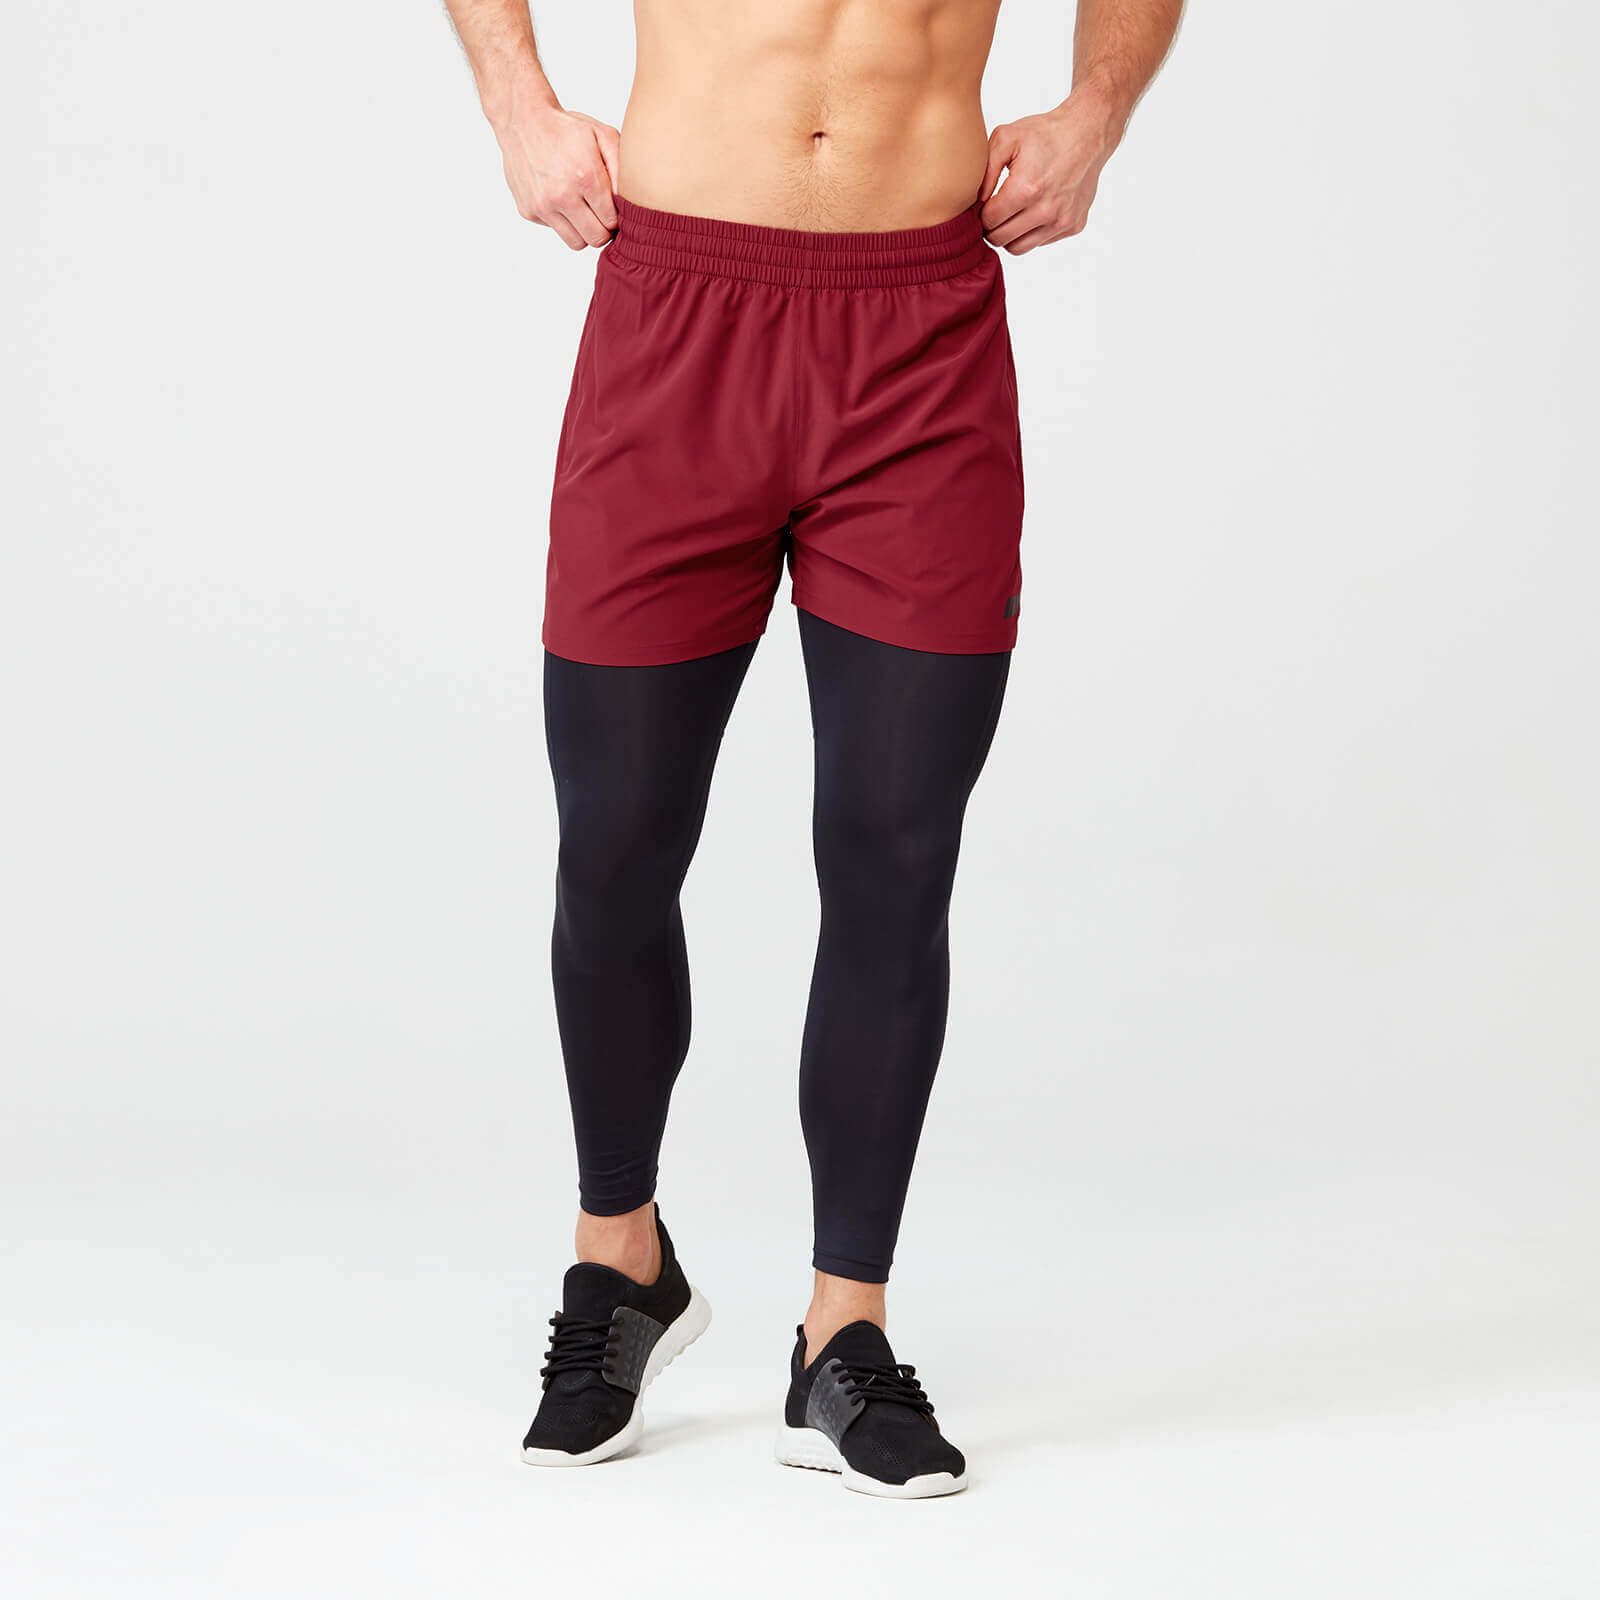 MP Men's Sprint Shorts - Red